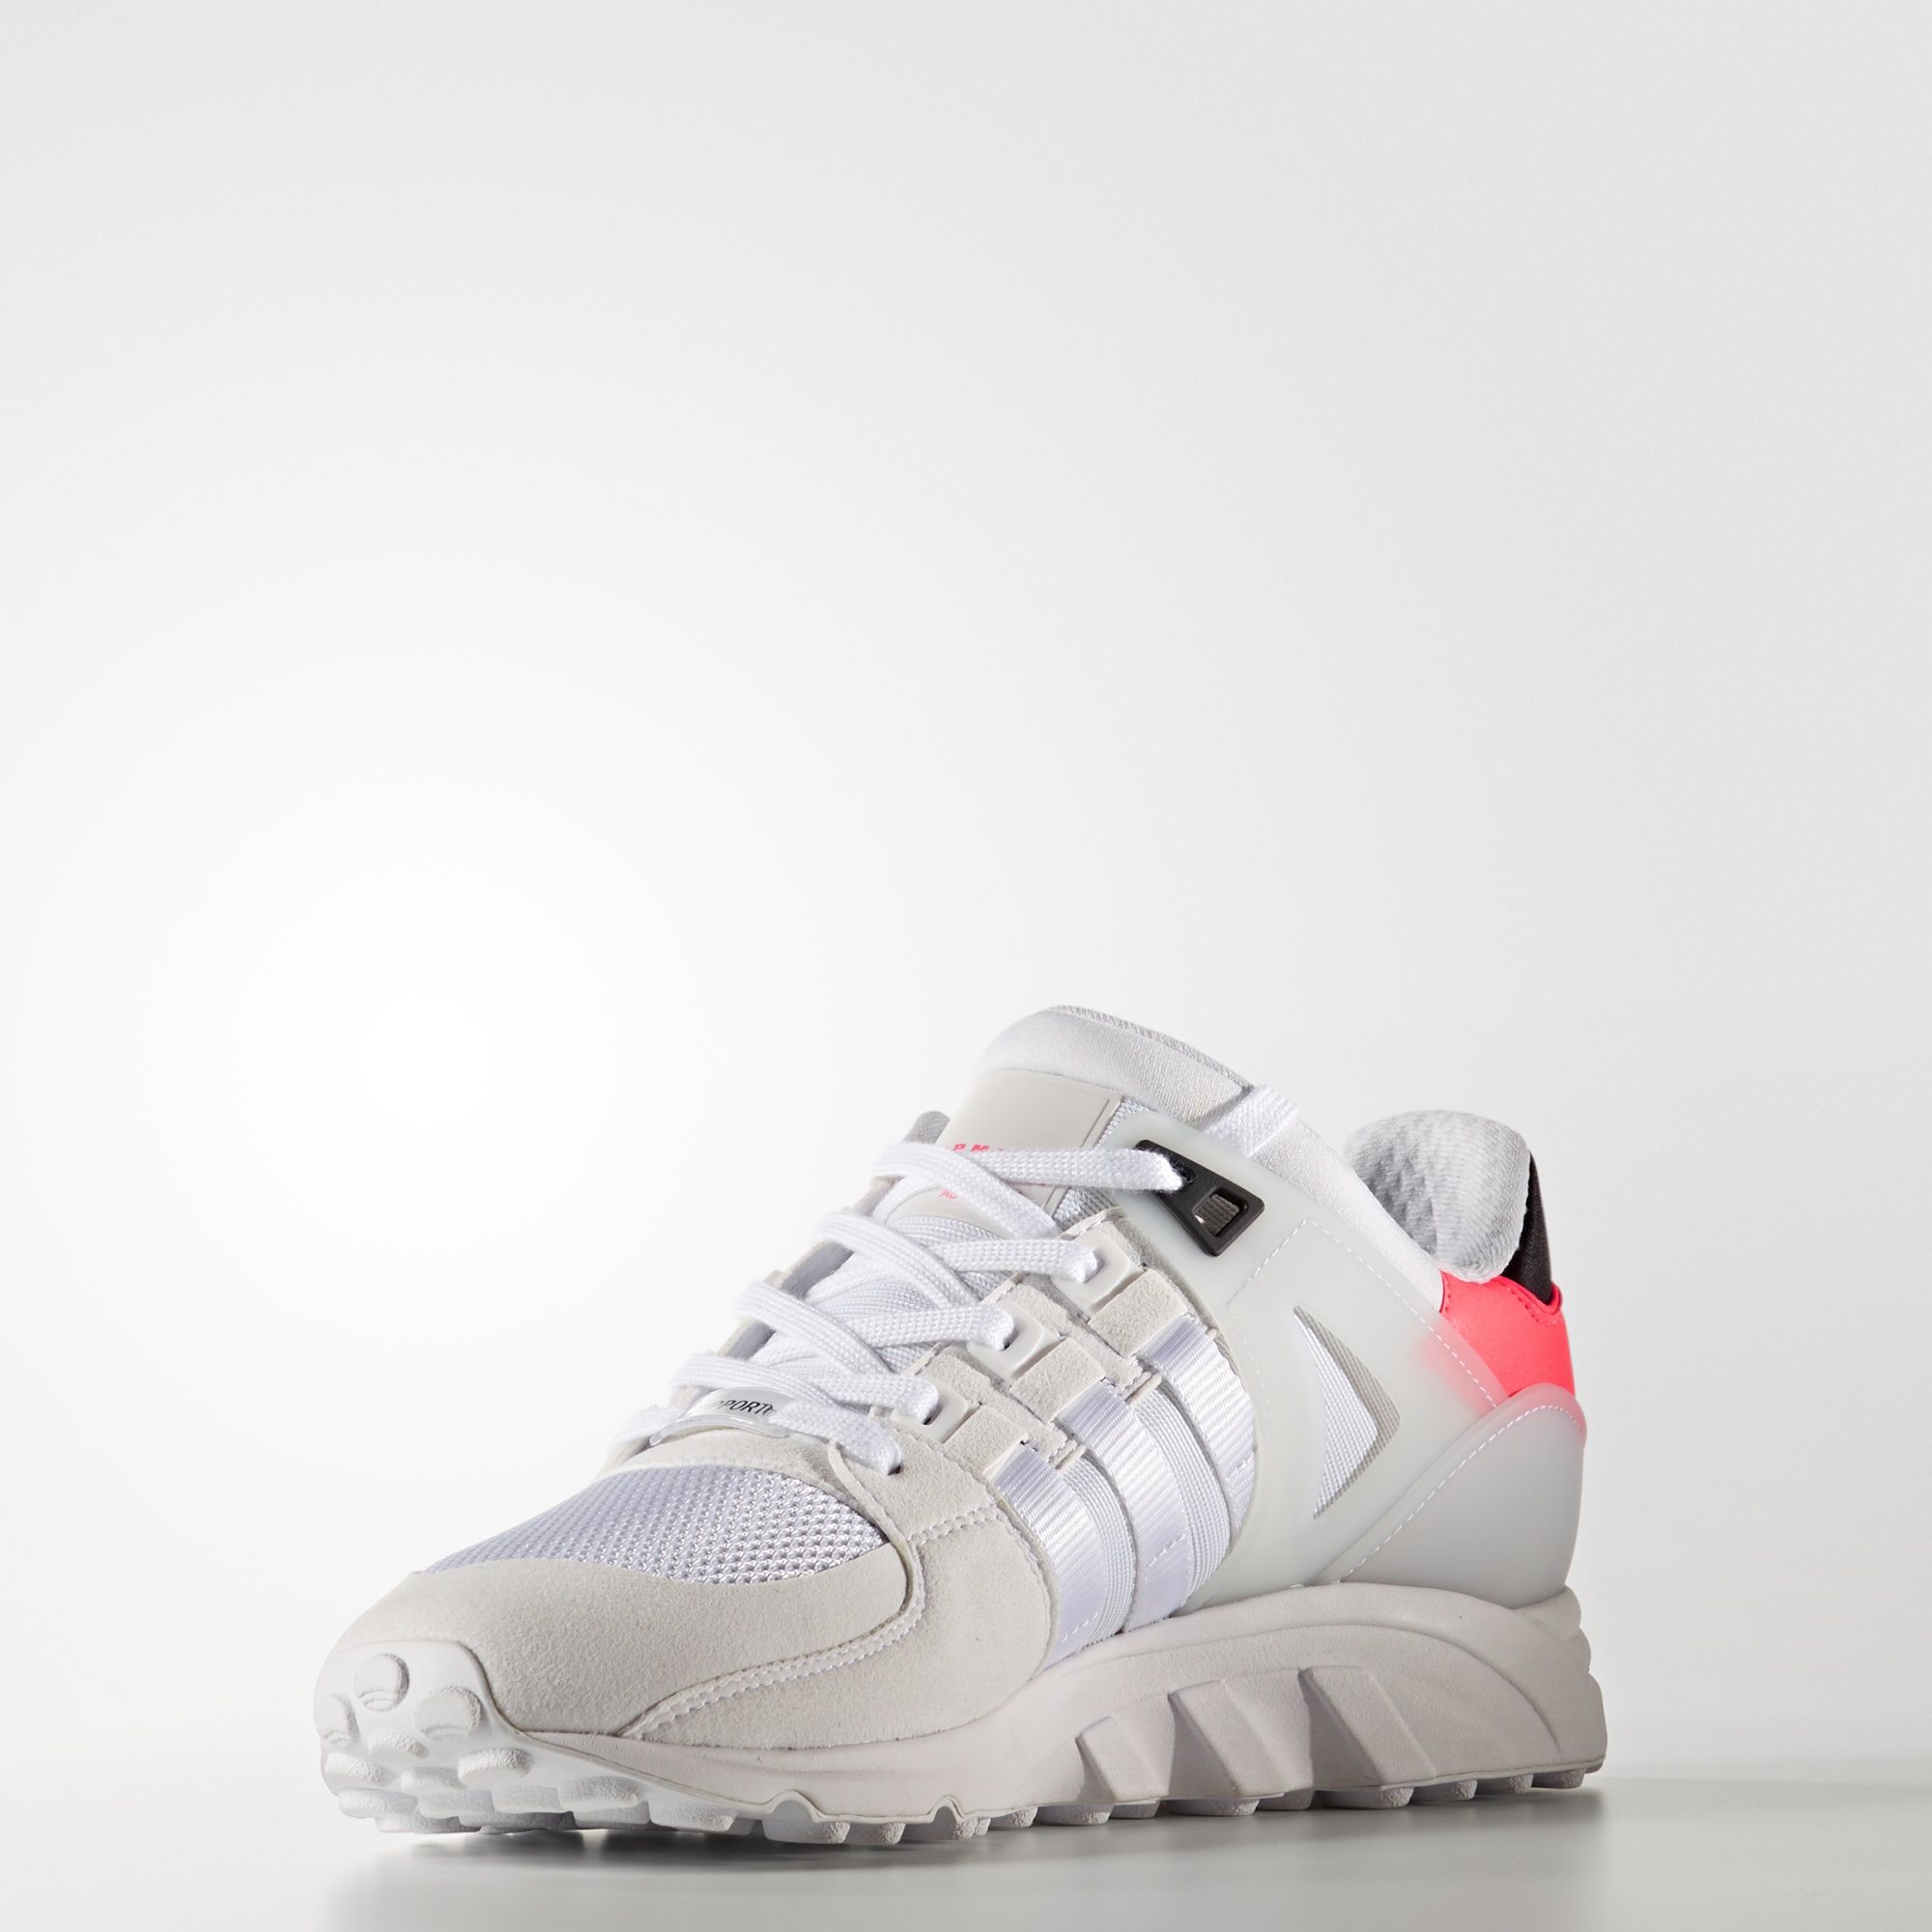 adidas-eqt-support-rf-white-turbo-red-ba7716-3